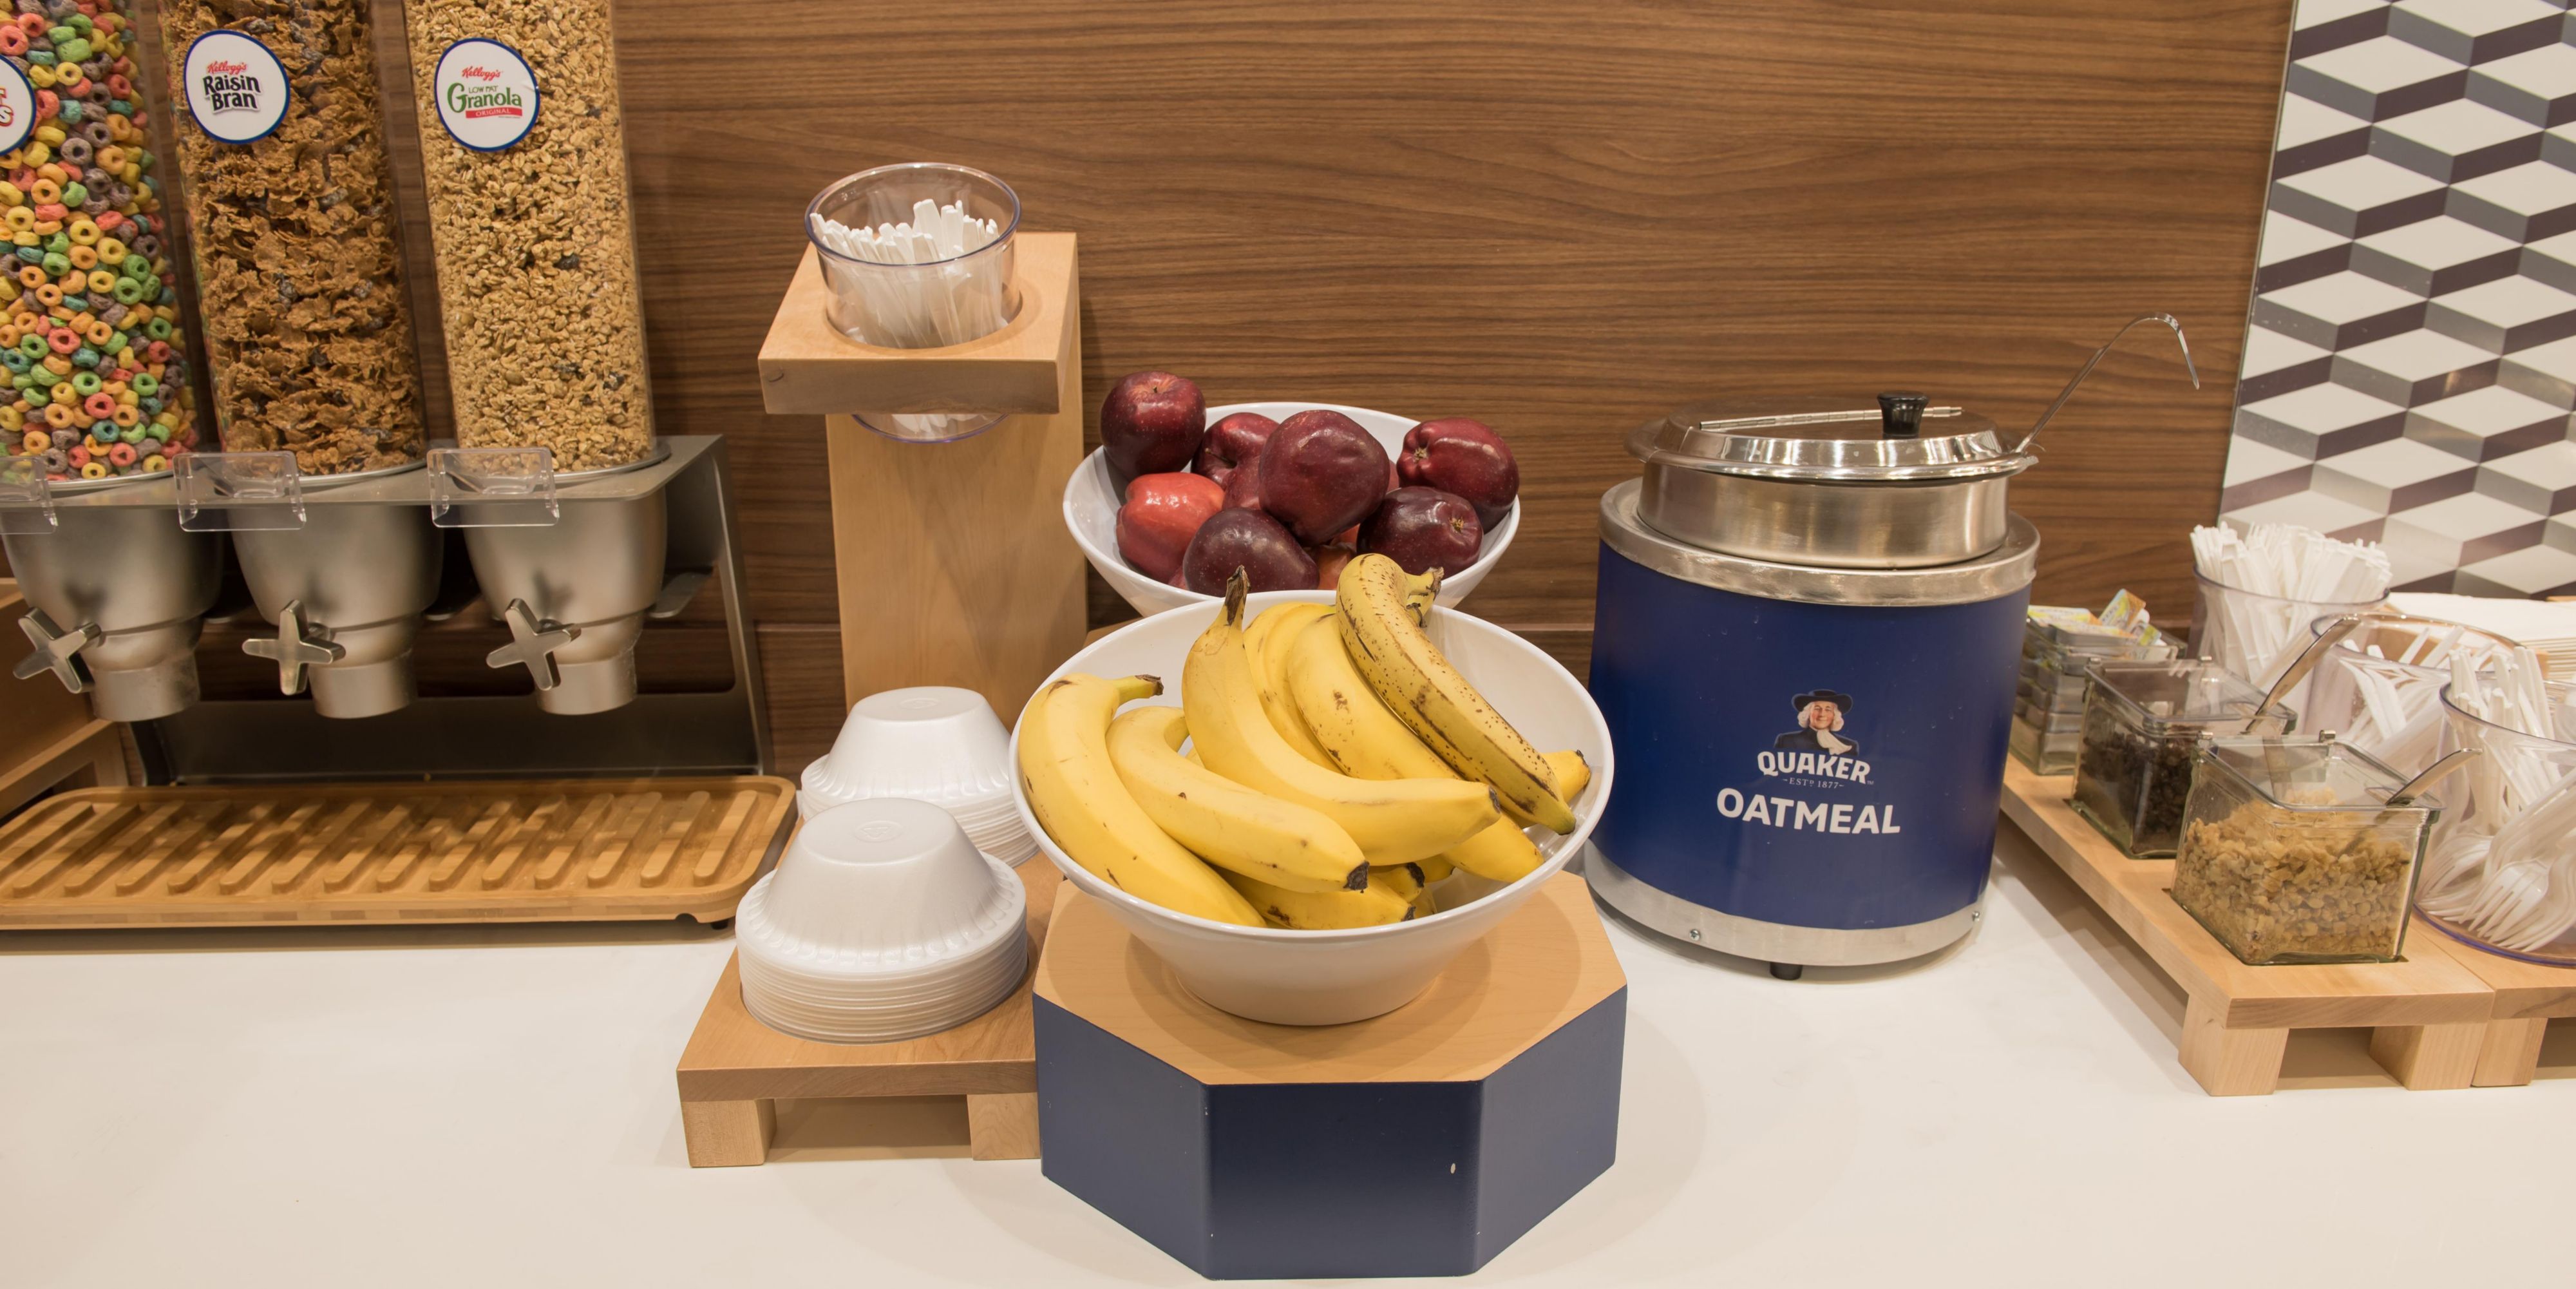 Enjoy our complimentary breakfast each morning of your stay.
